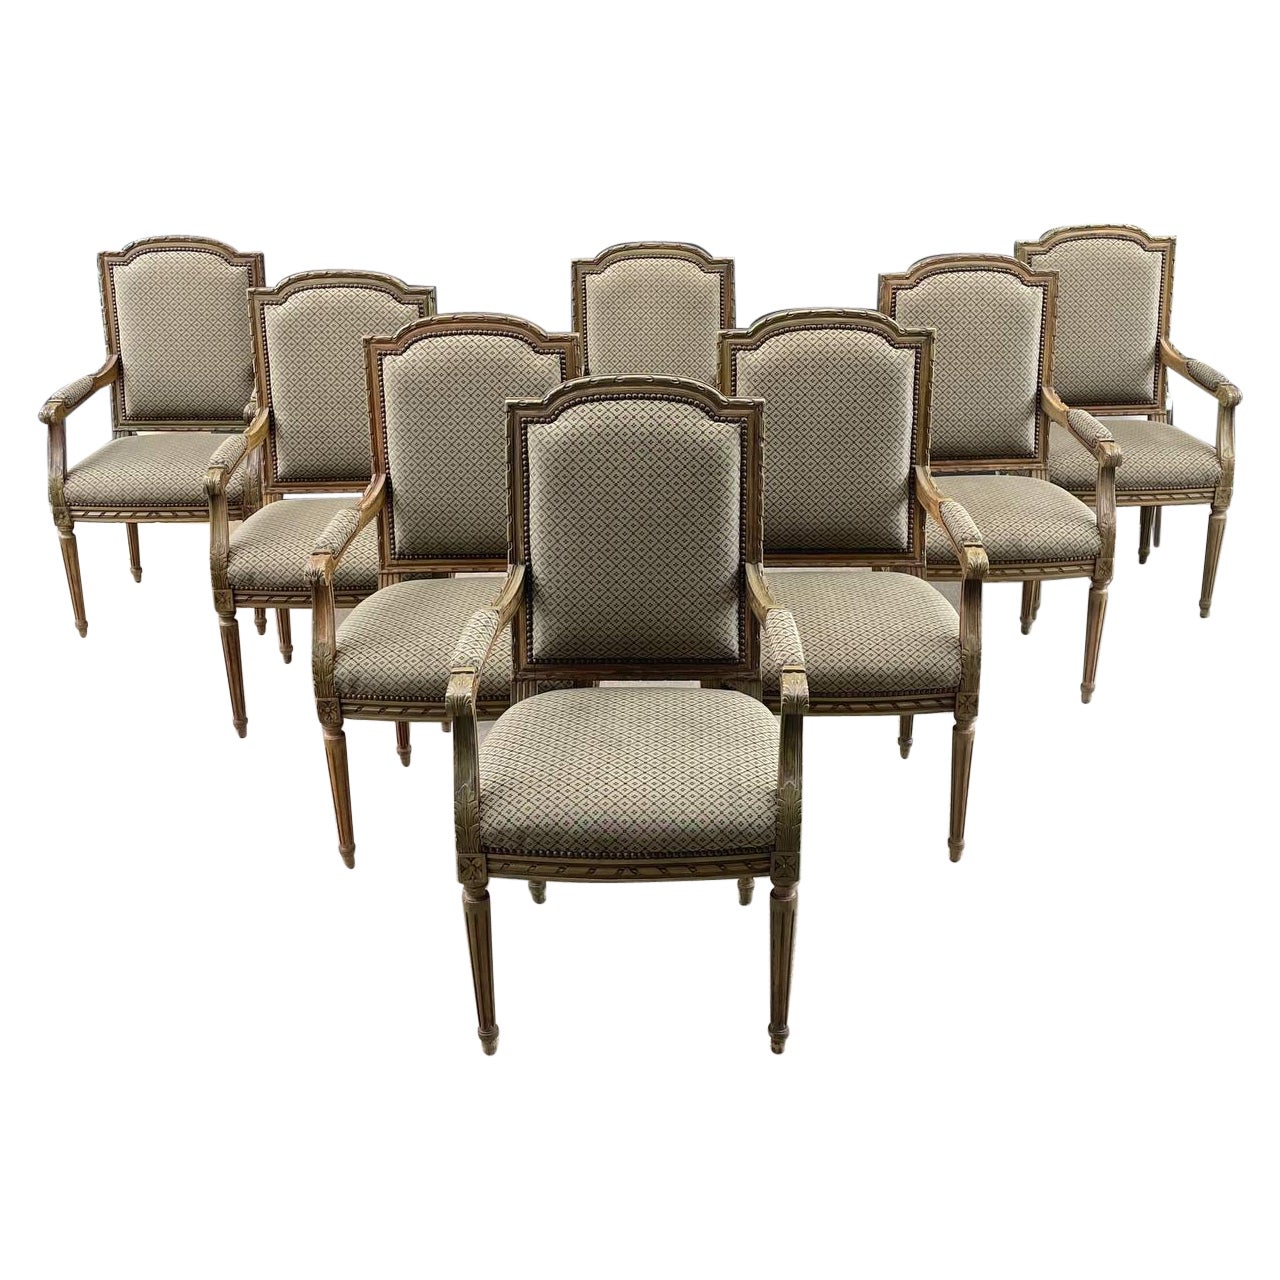 Set of 8 Vintage French Louis XV Sculpted Arm Chairs For Sale